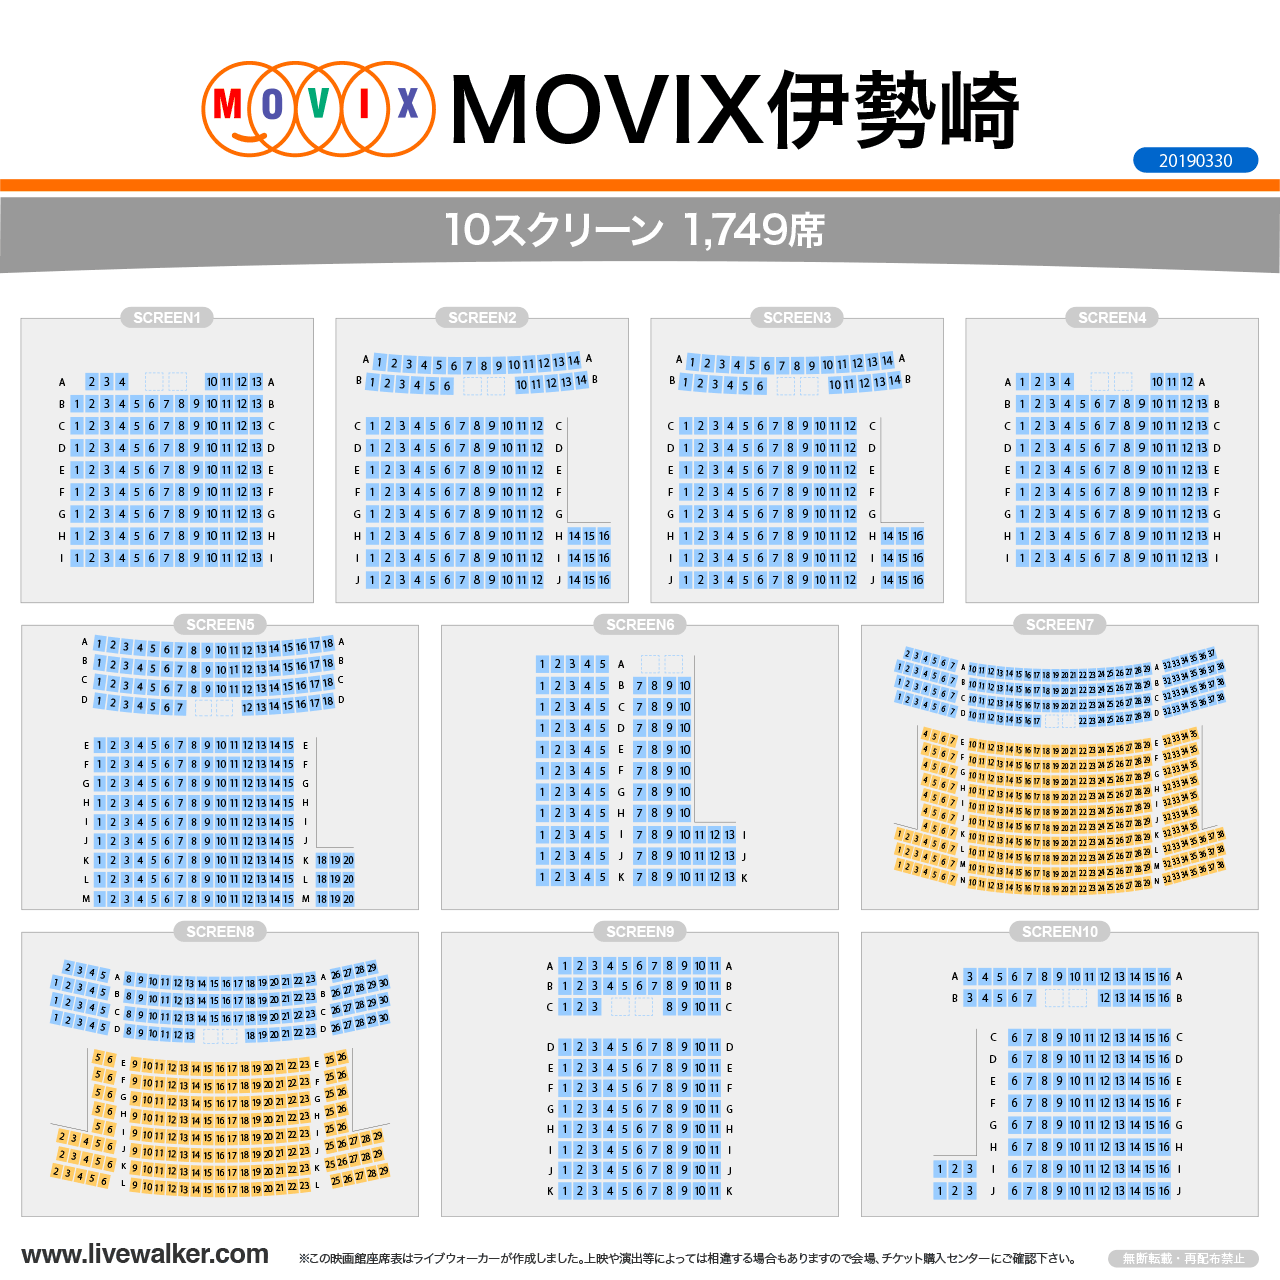 MOVIX伊勢崎シアターの座席表